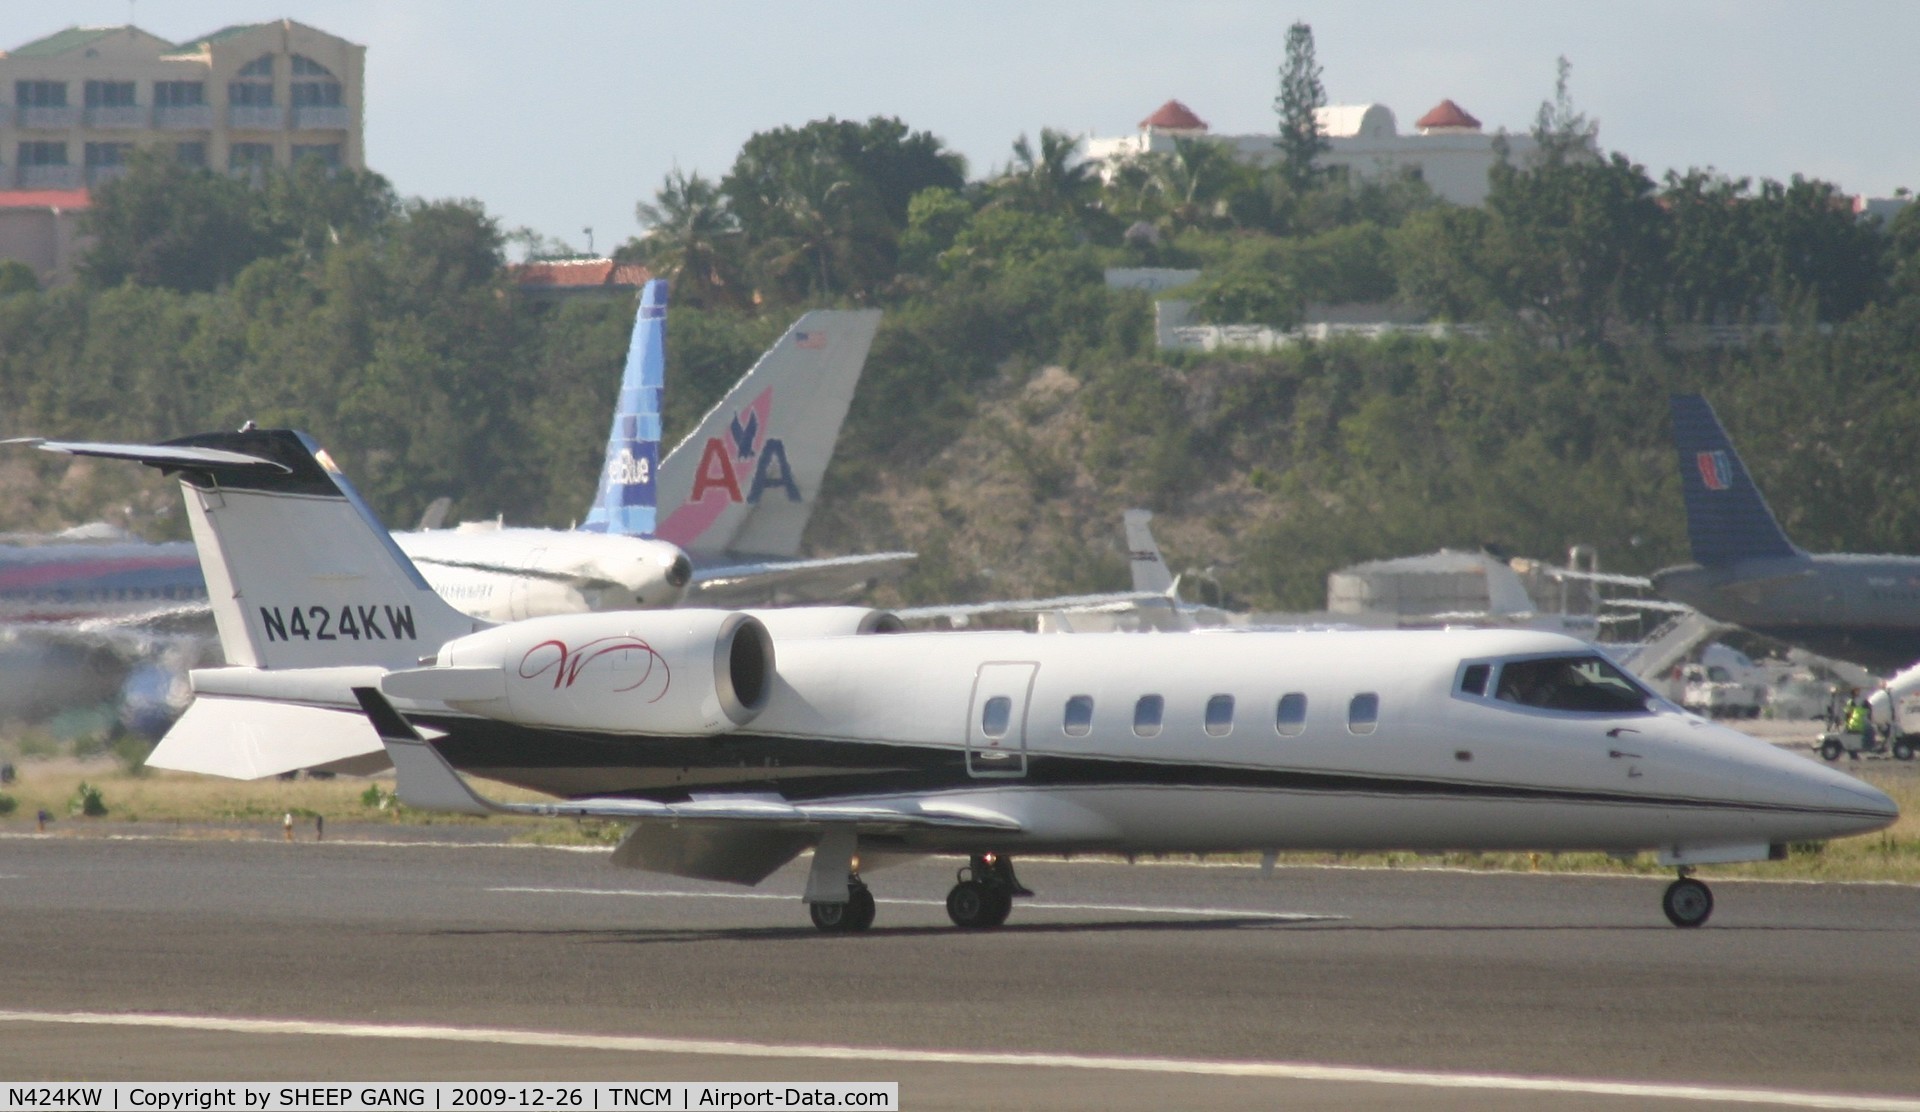 N424KW, 1999 Learjet Inc 60 C/N 153, N424KW back tracking on the runway after ladning at TNCM